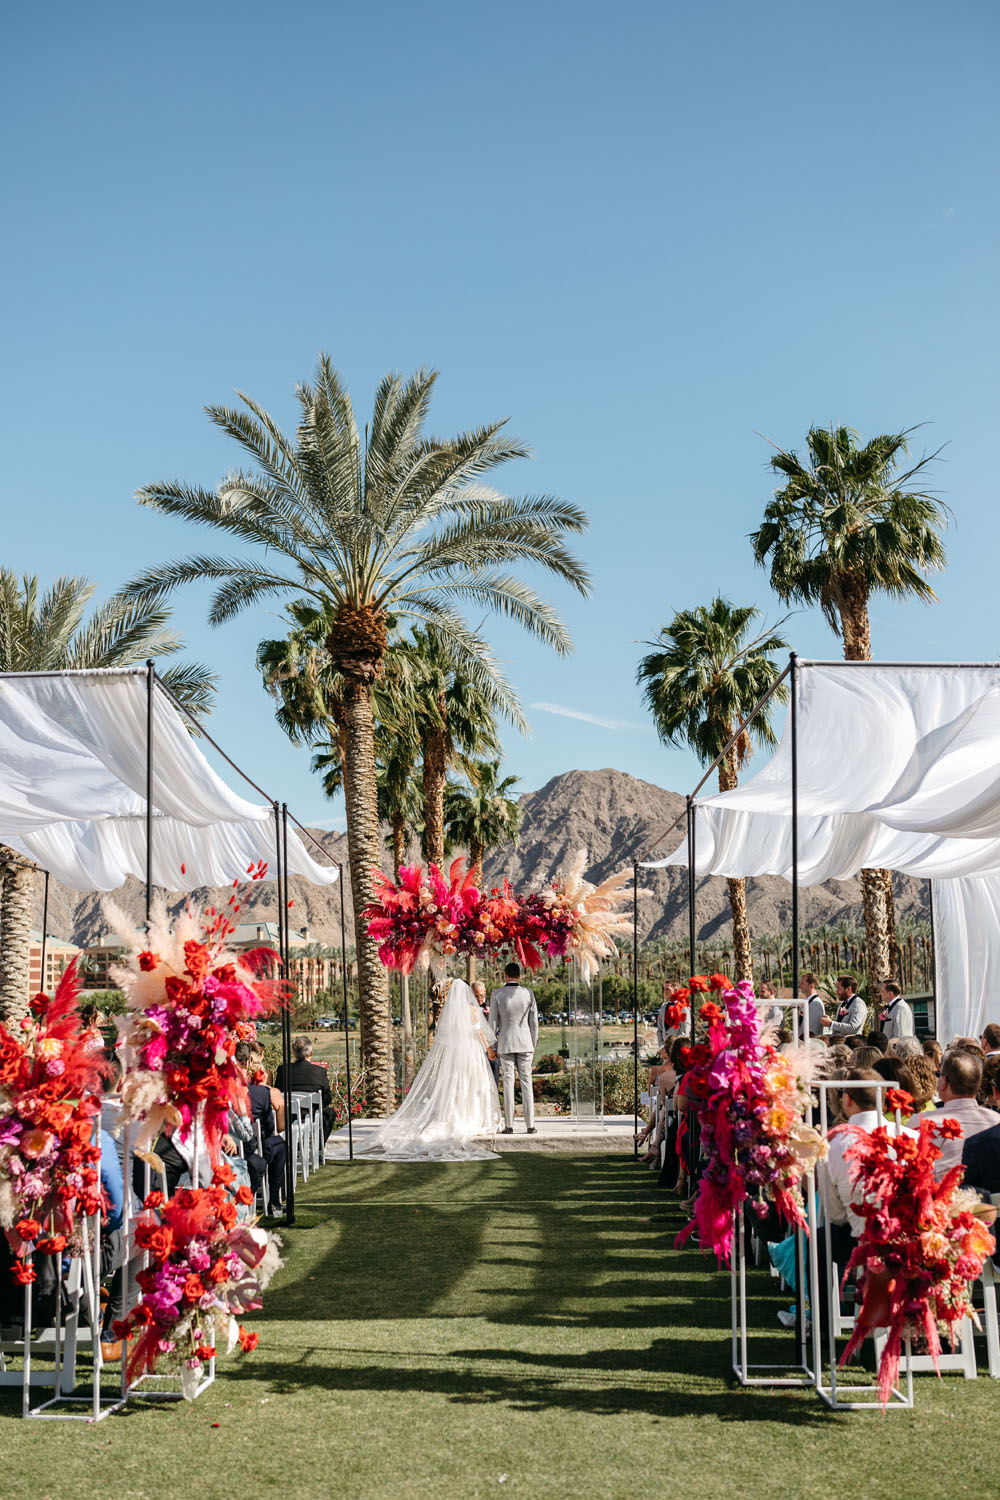 Electric pink and colorful wedding in the desert